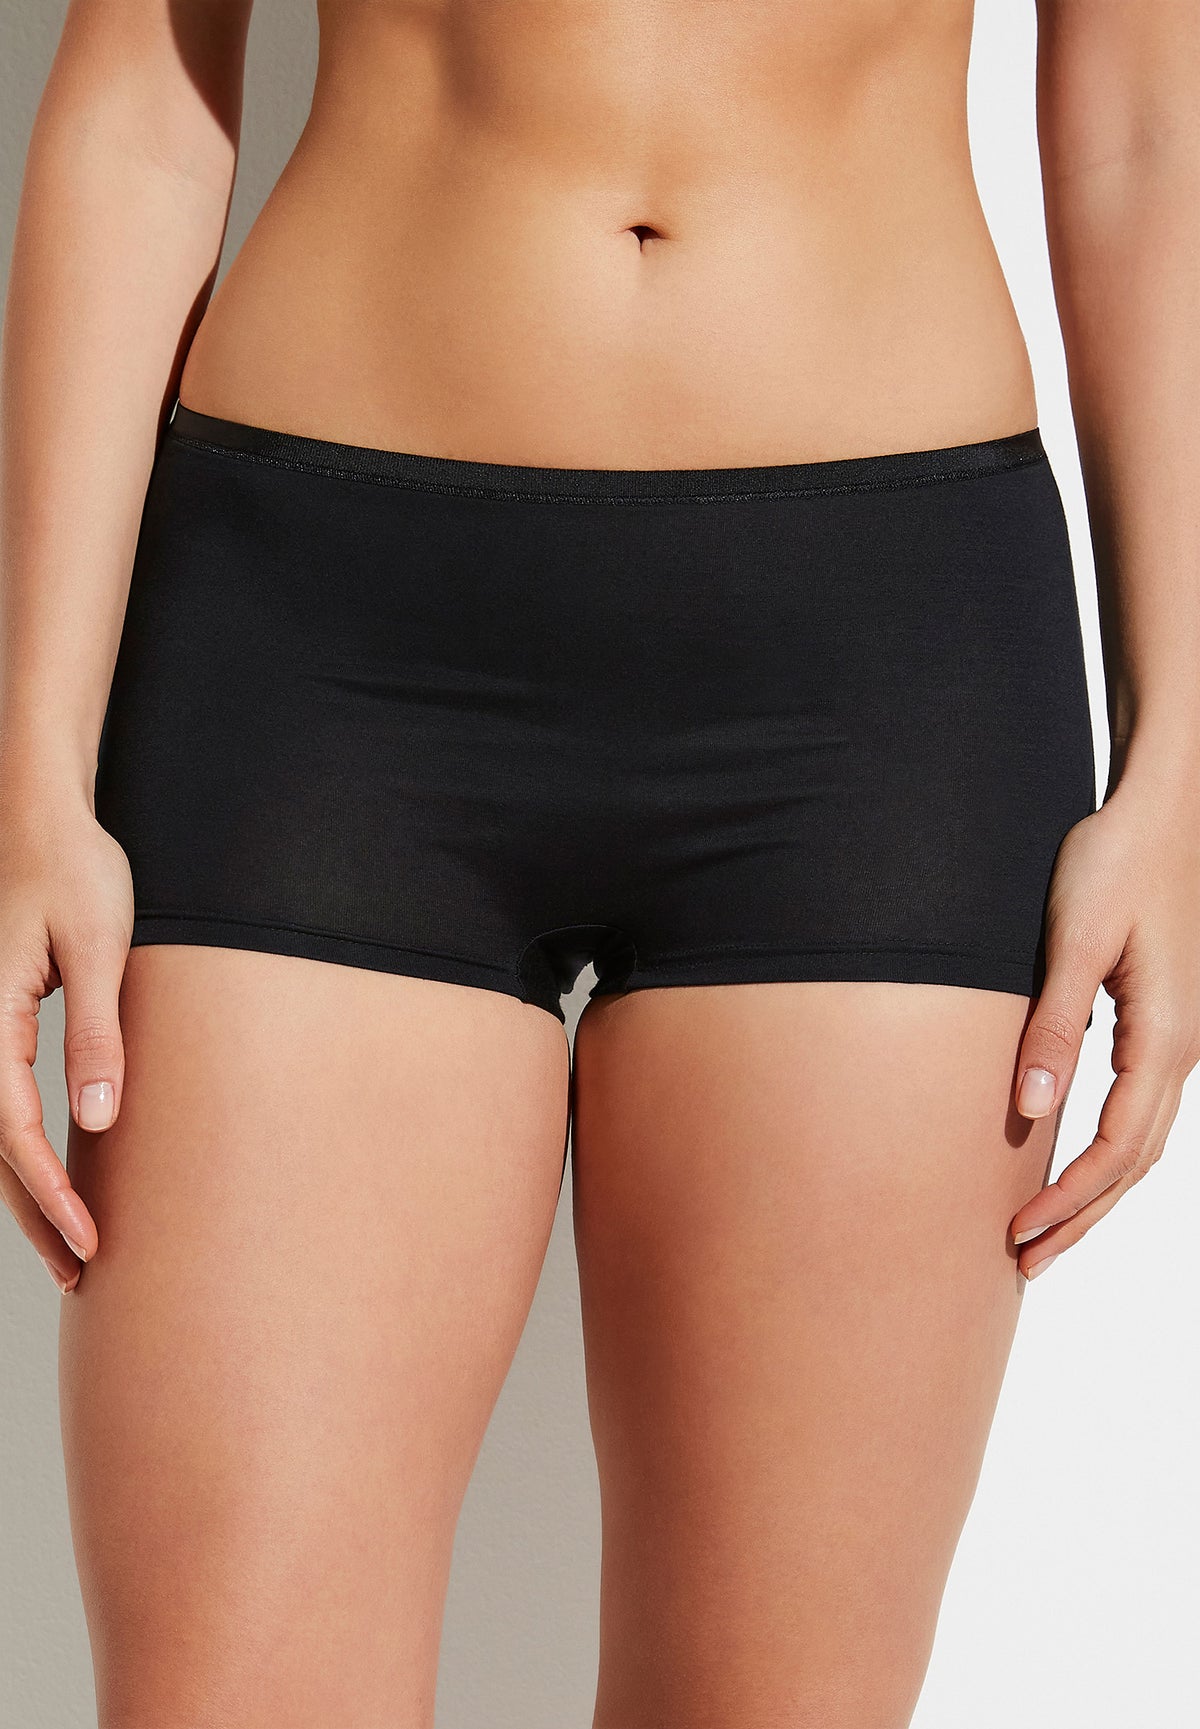 SHEWEE Shorts - Technical, Breathable Underwear For Walking